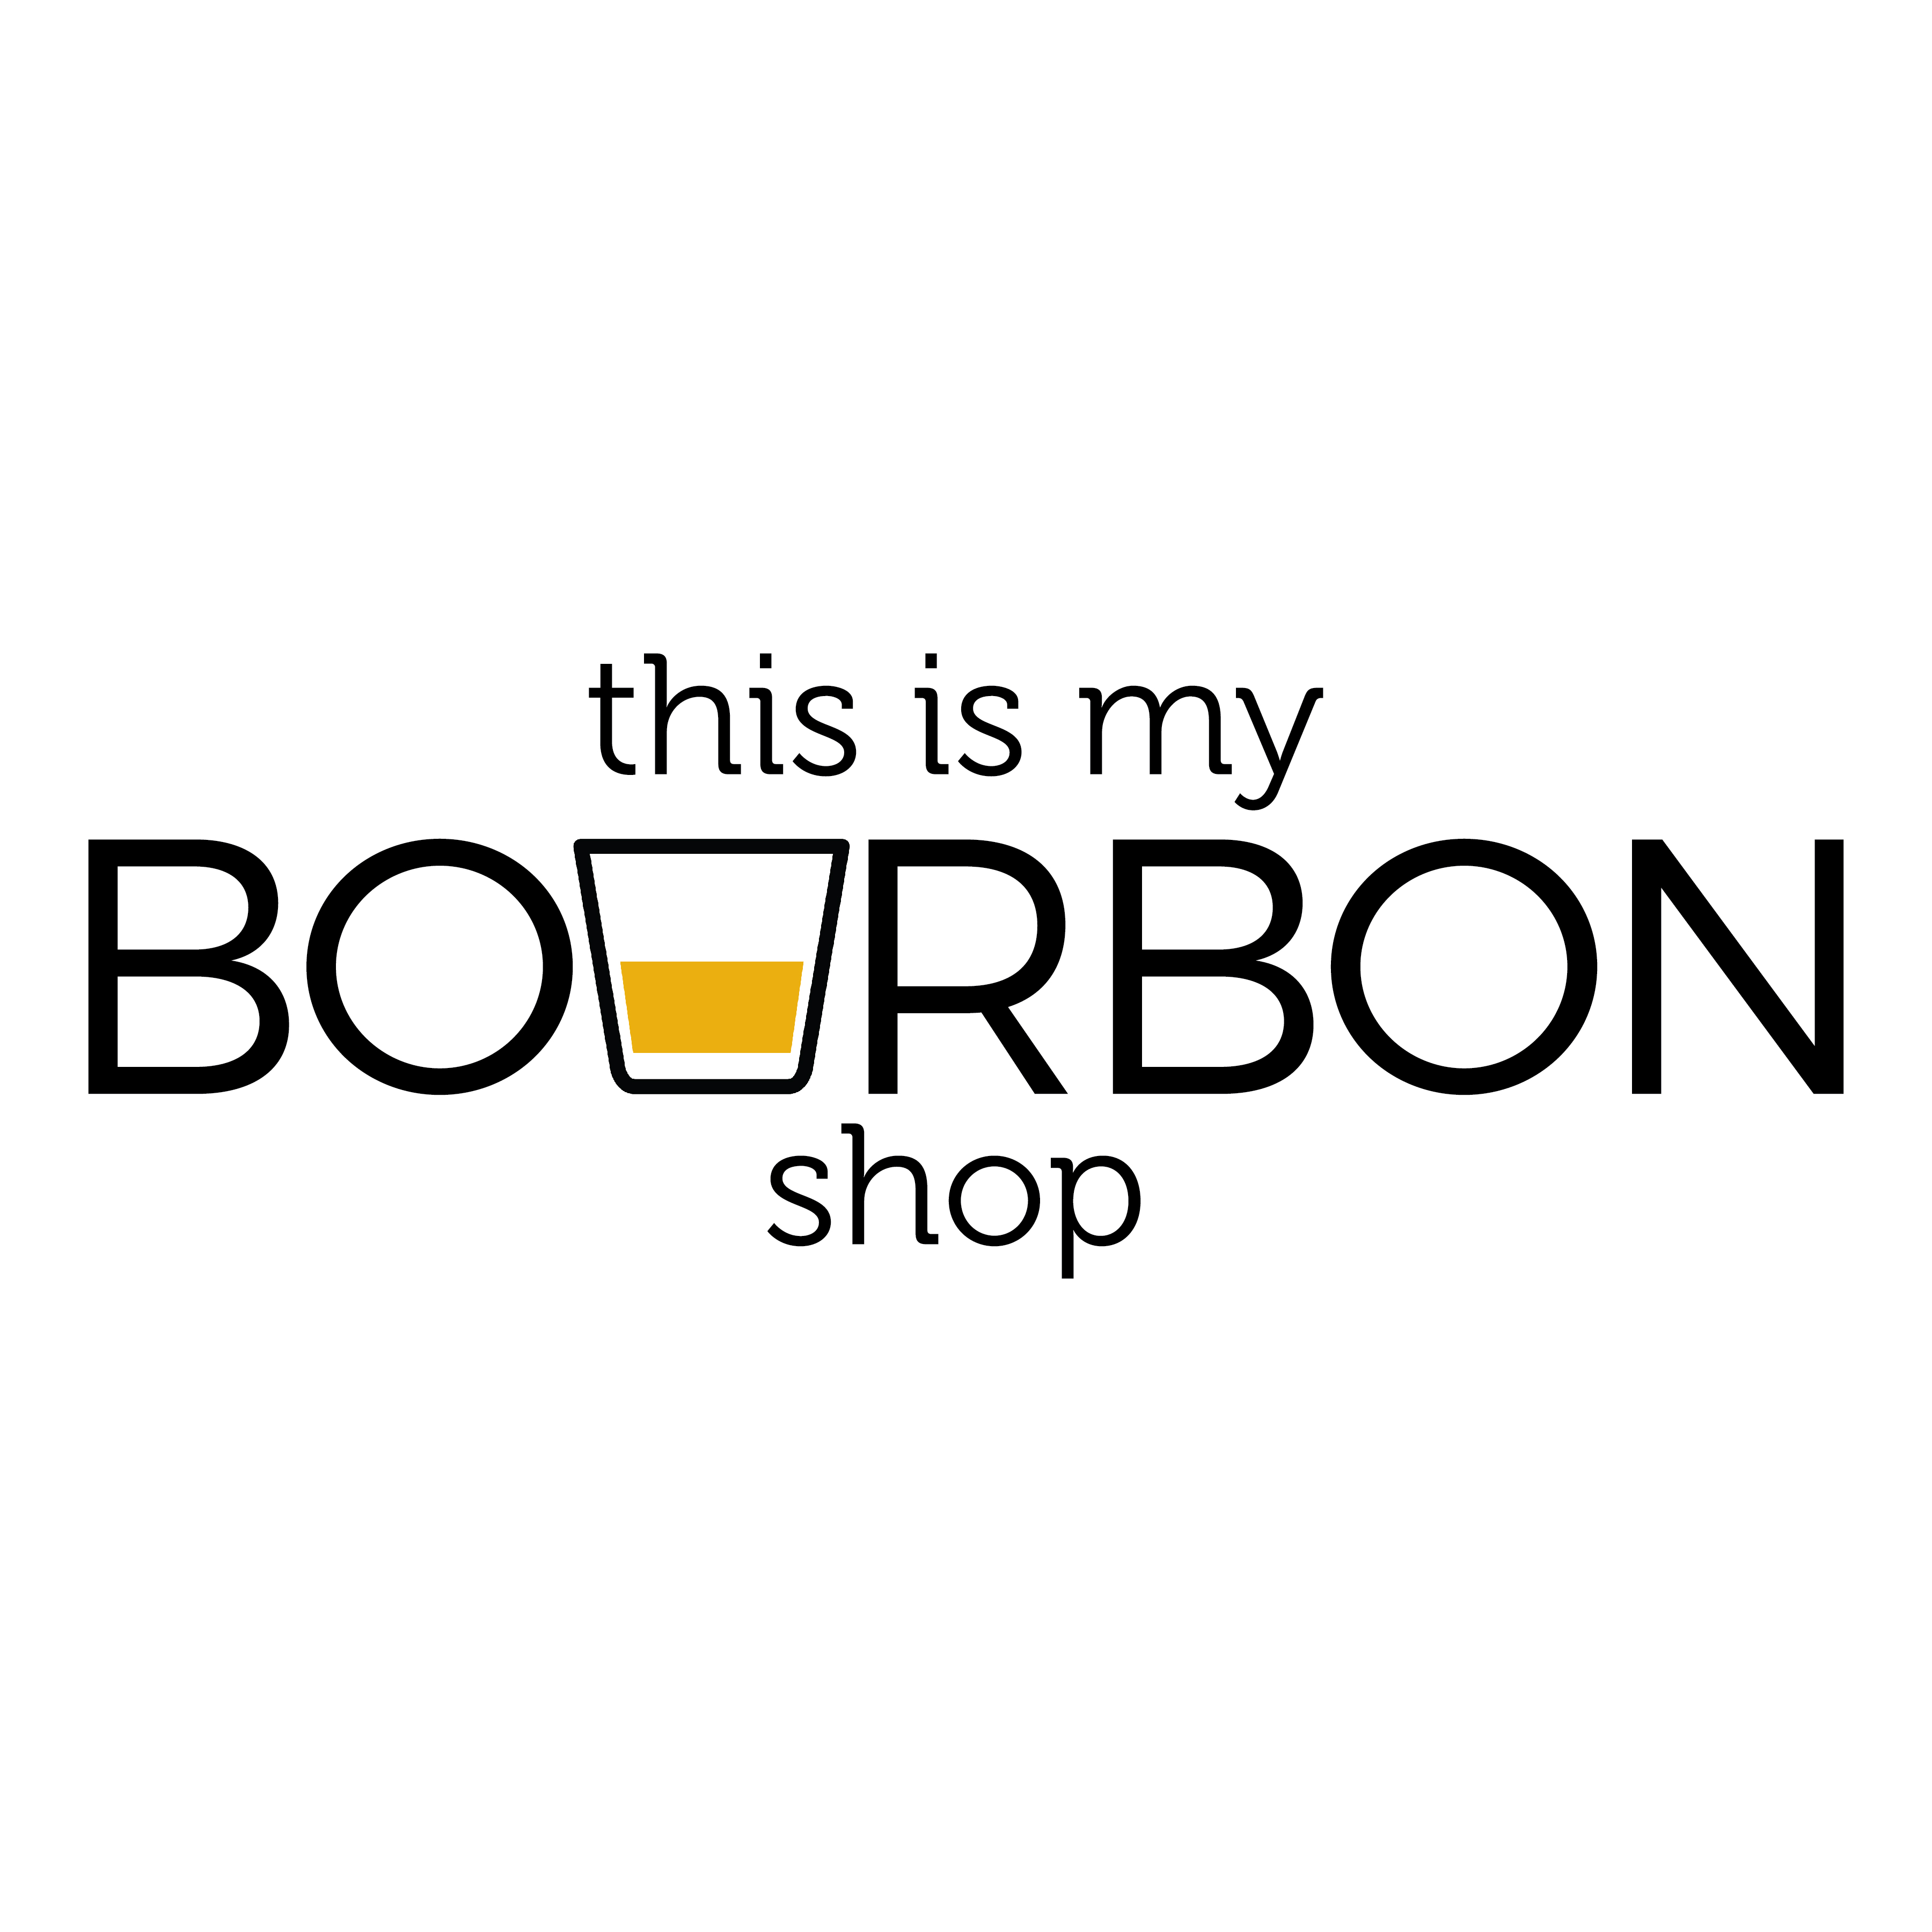 Bourbon Logo - This Is My Bourbon Shop | Featuring custom t-shirts, prints, and more